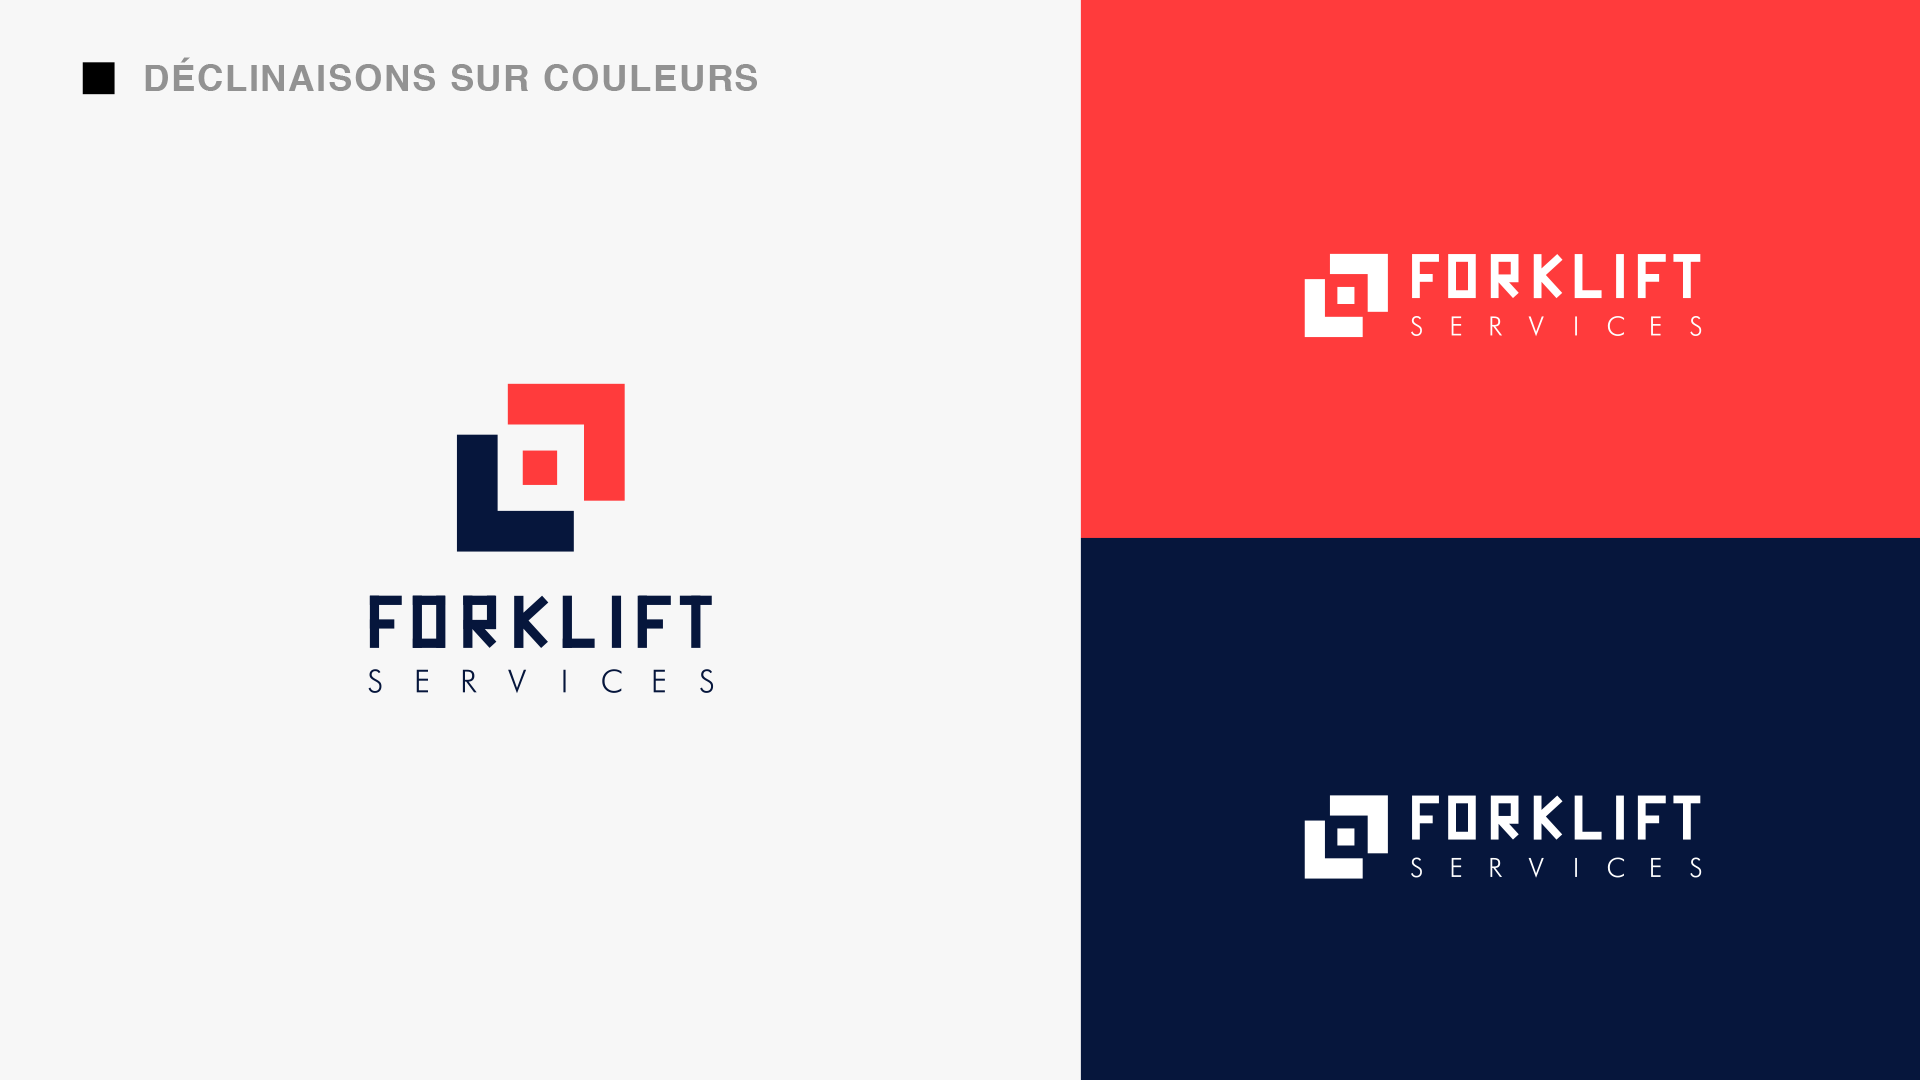 couleurs-forklift-services-by-bca-brands